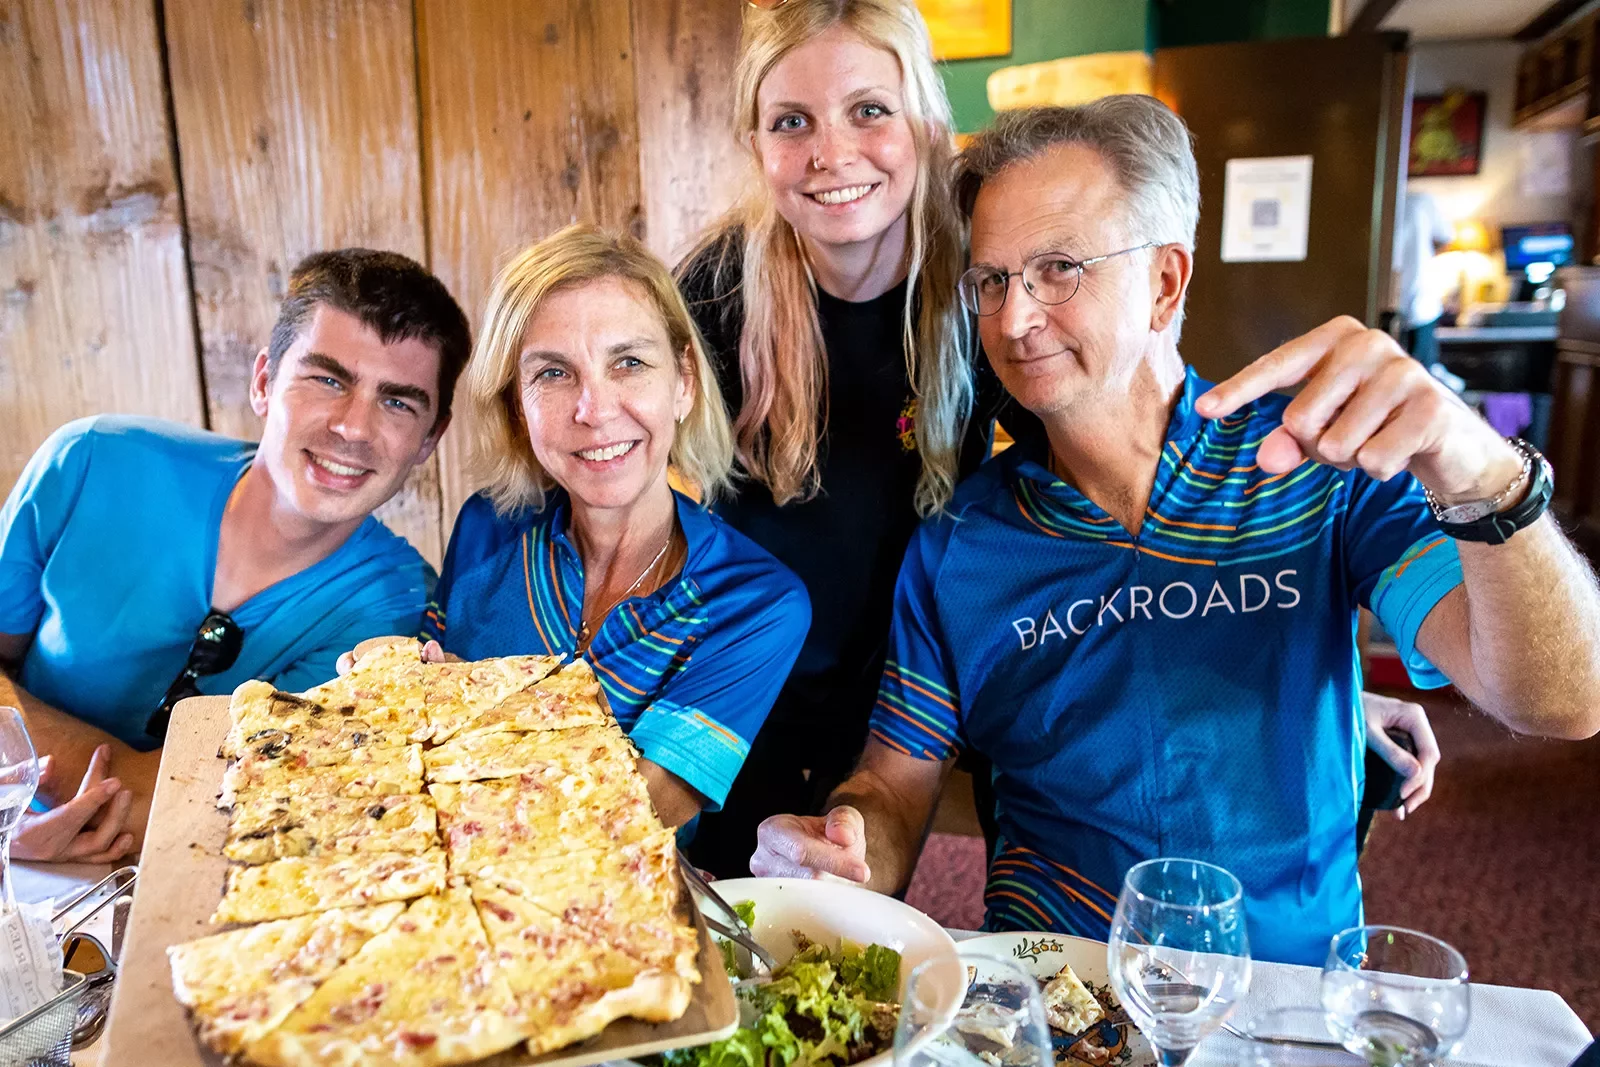 Four Backroads Guests Showing off Food in Alsace